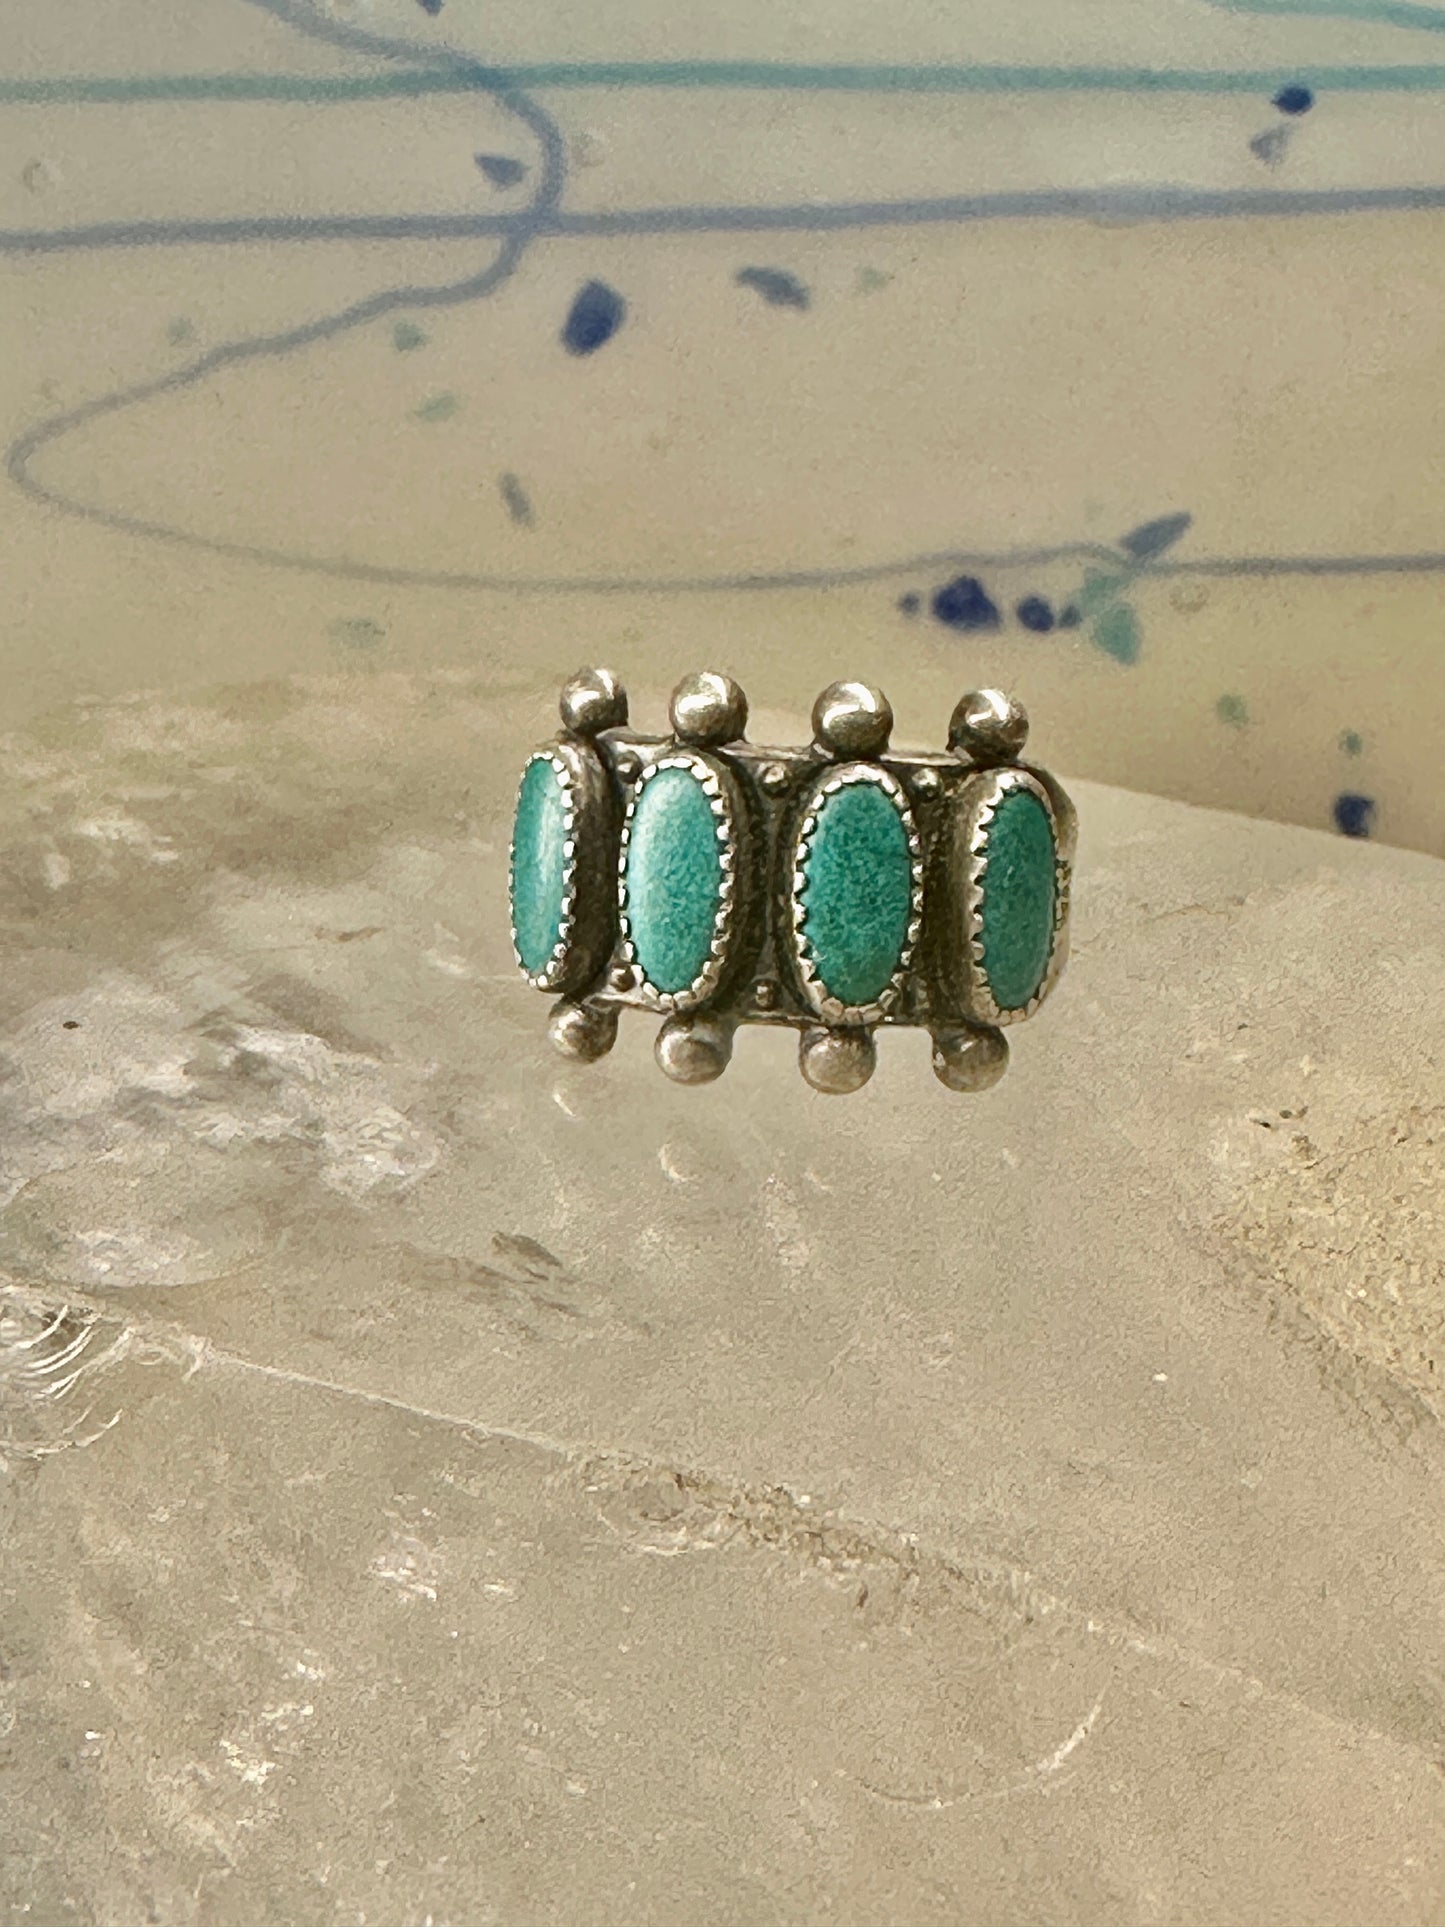 Zuni ring turquoise band size 4.75 pinky  petite point sterling silver women girls